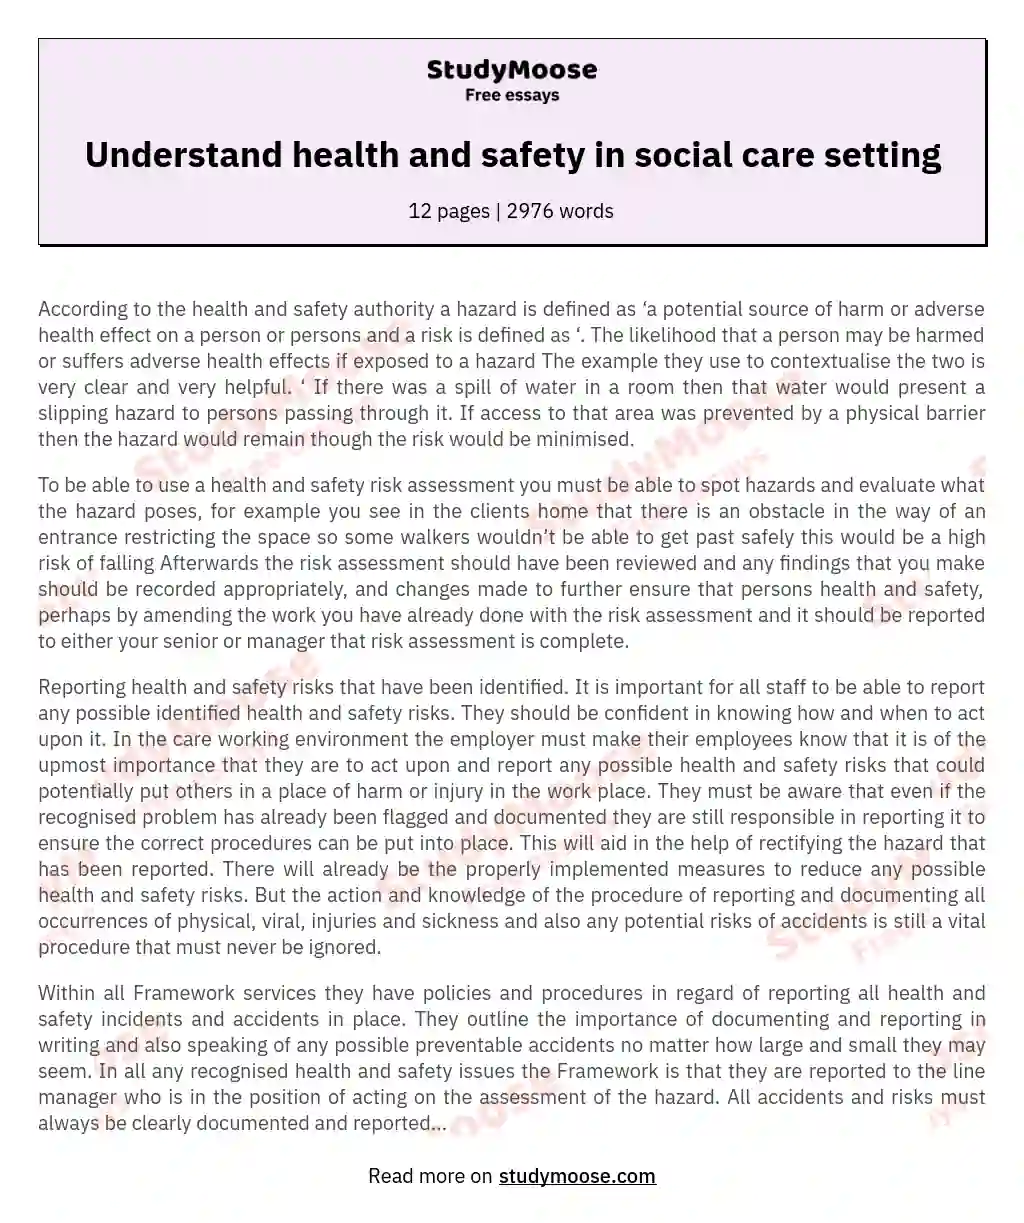 Understand health and safety in social care setting essay